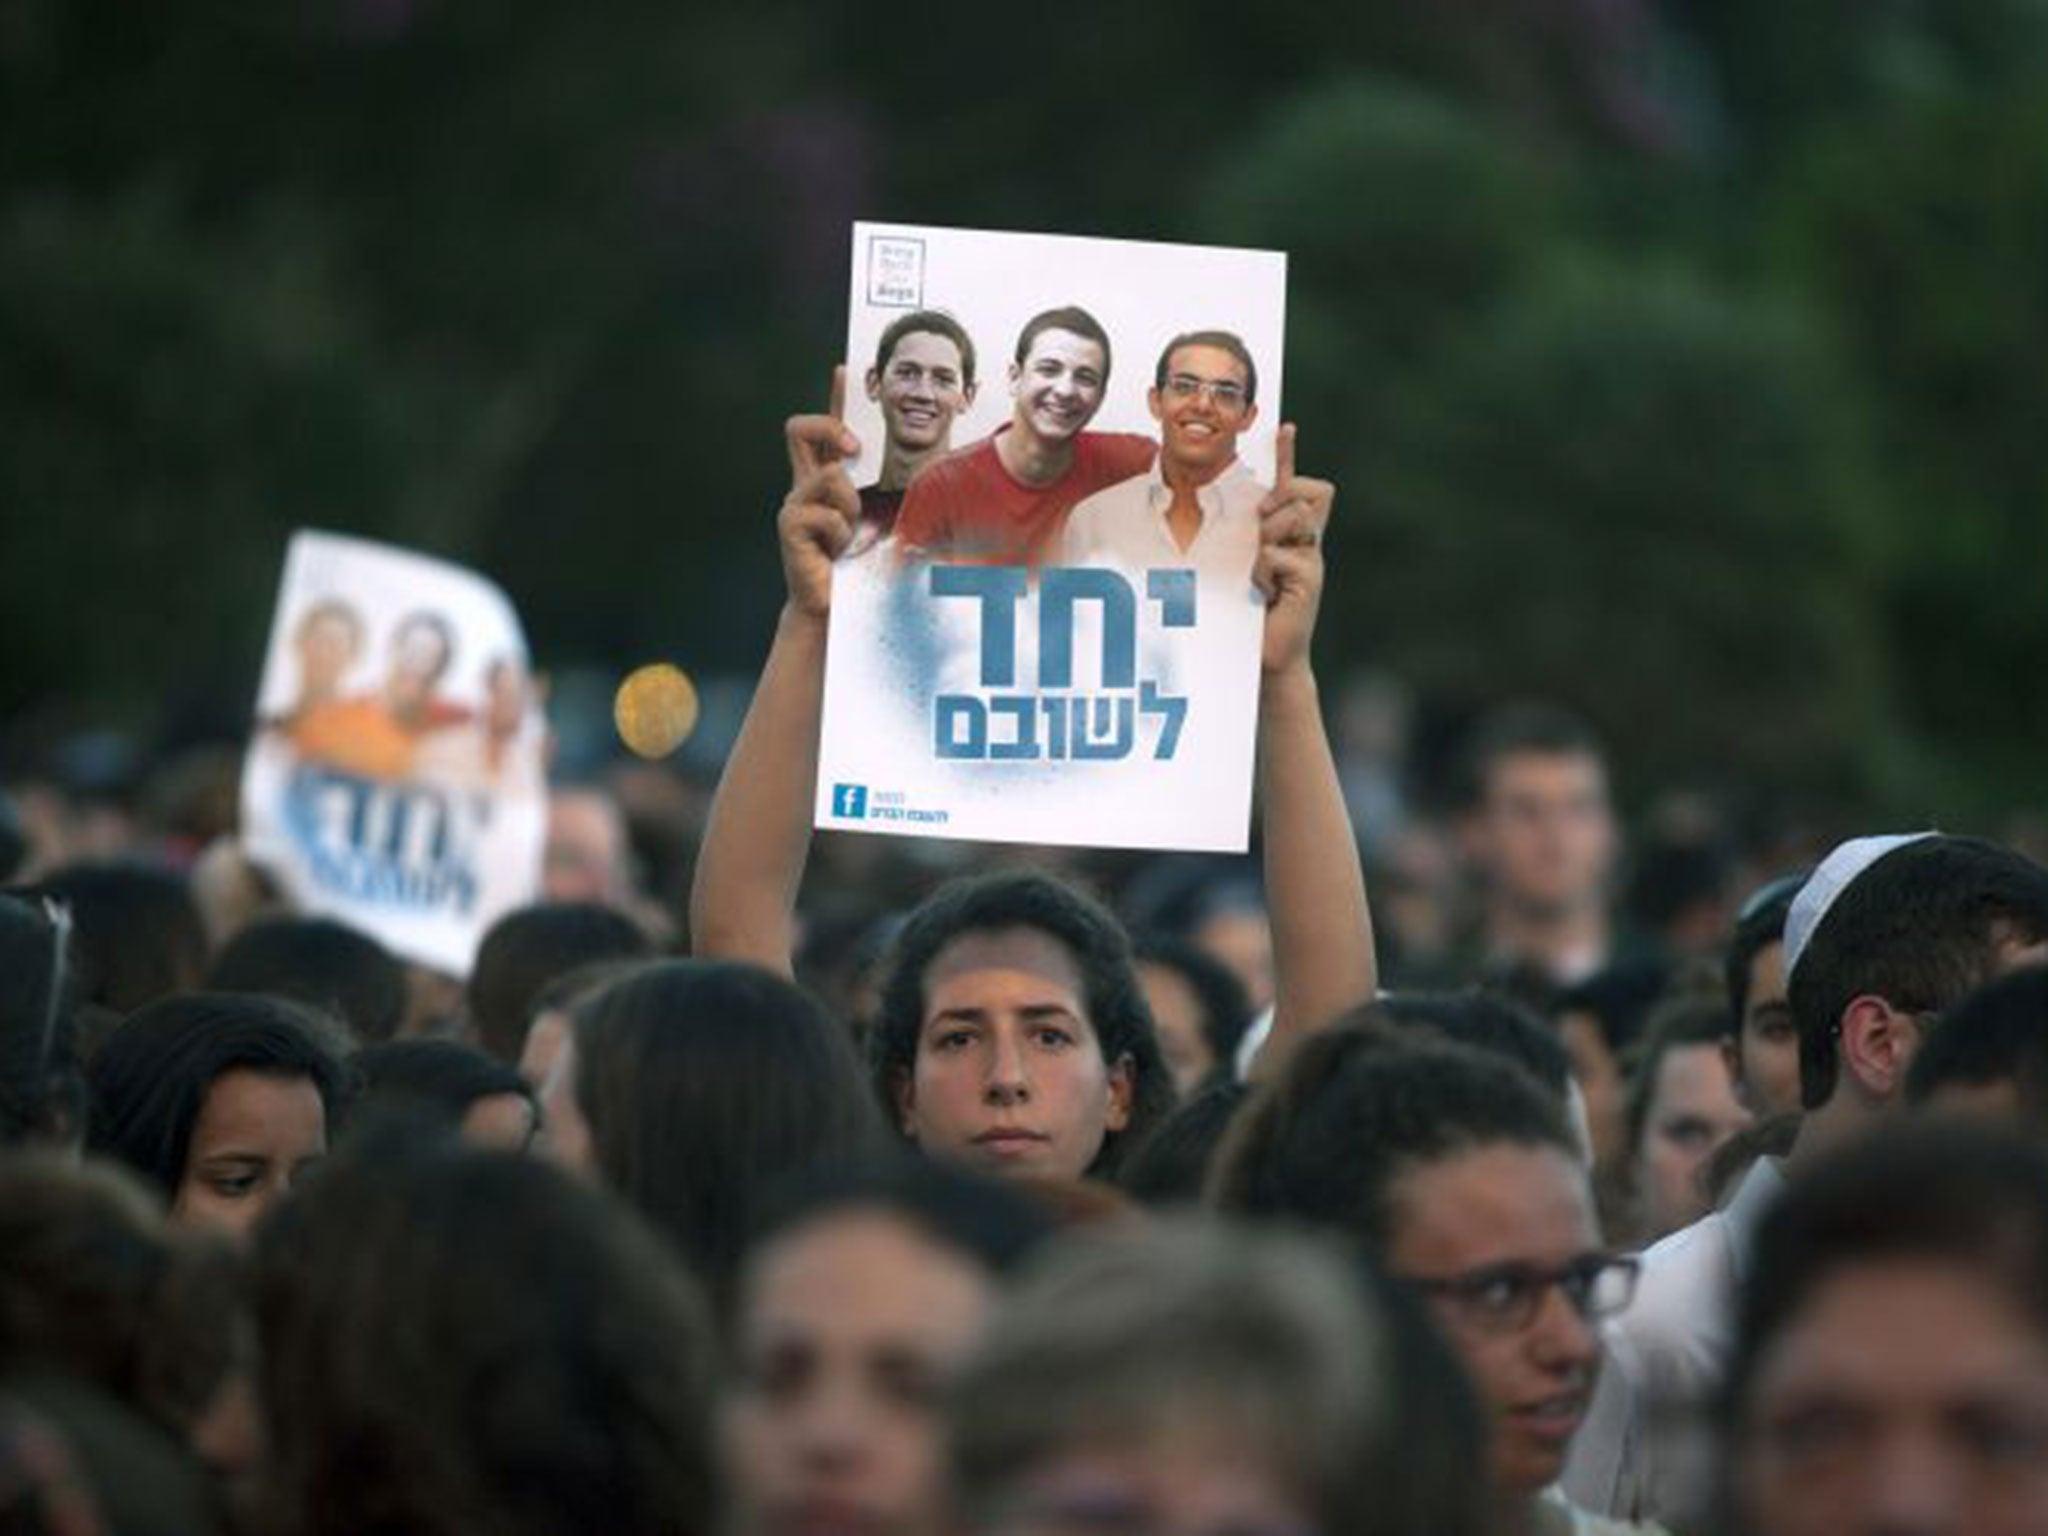 The alleged kidnapping of the three boys, which the Israeli government blamed on Hamas, led to mass rallies in Tel Aviv and elsewhere